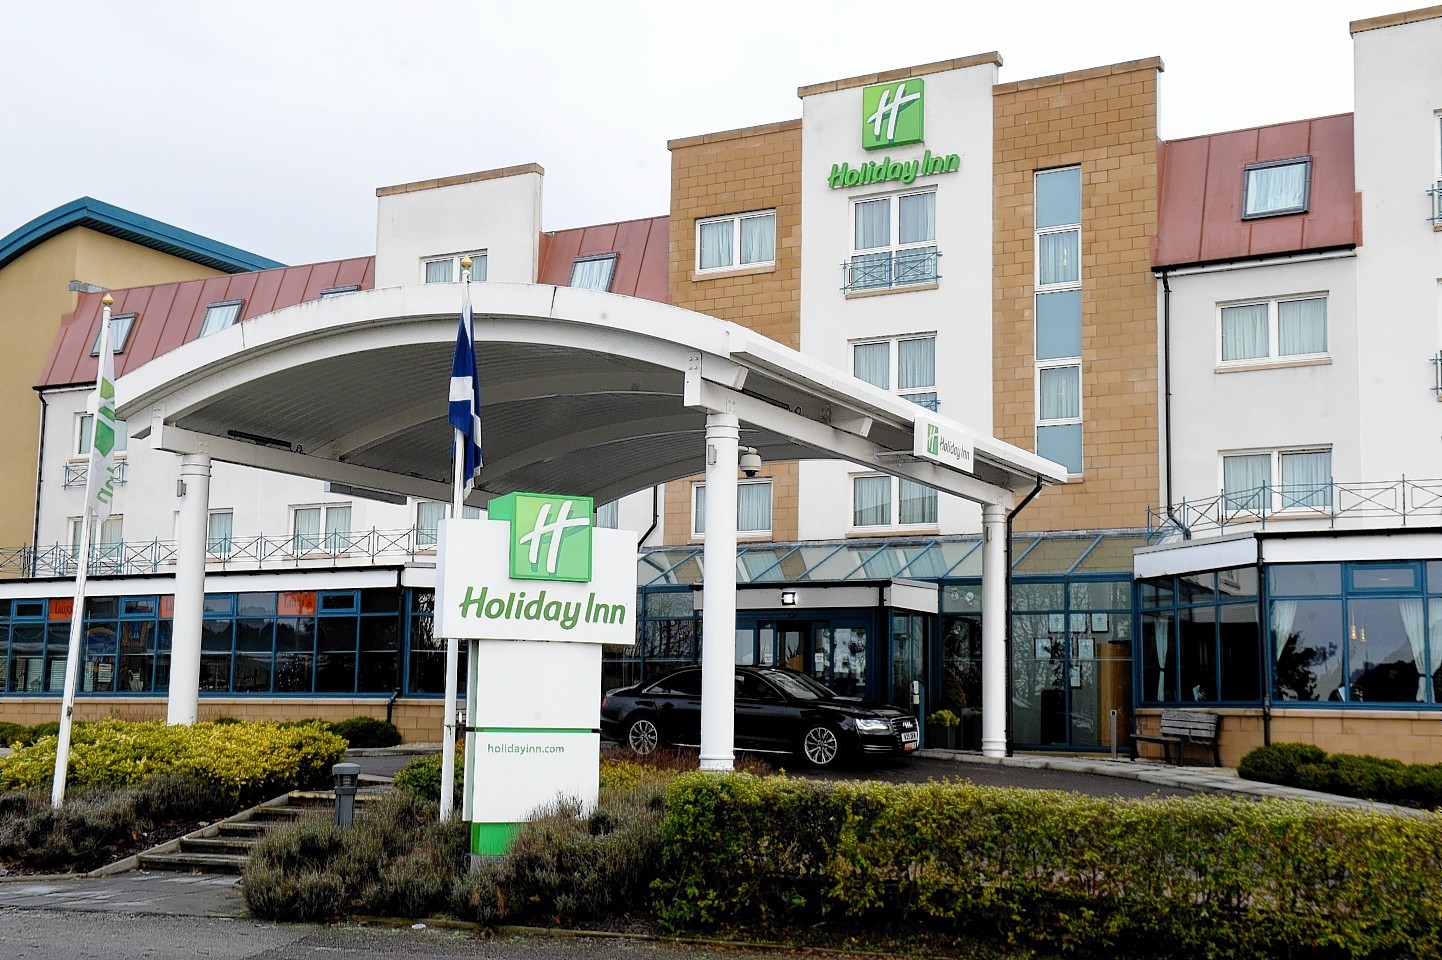 The Holiday Inn at Westhil